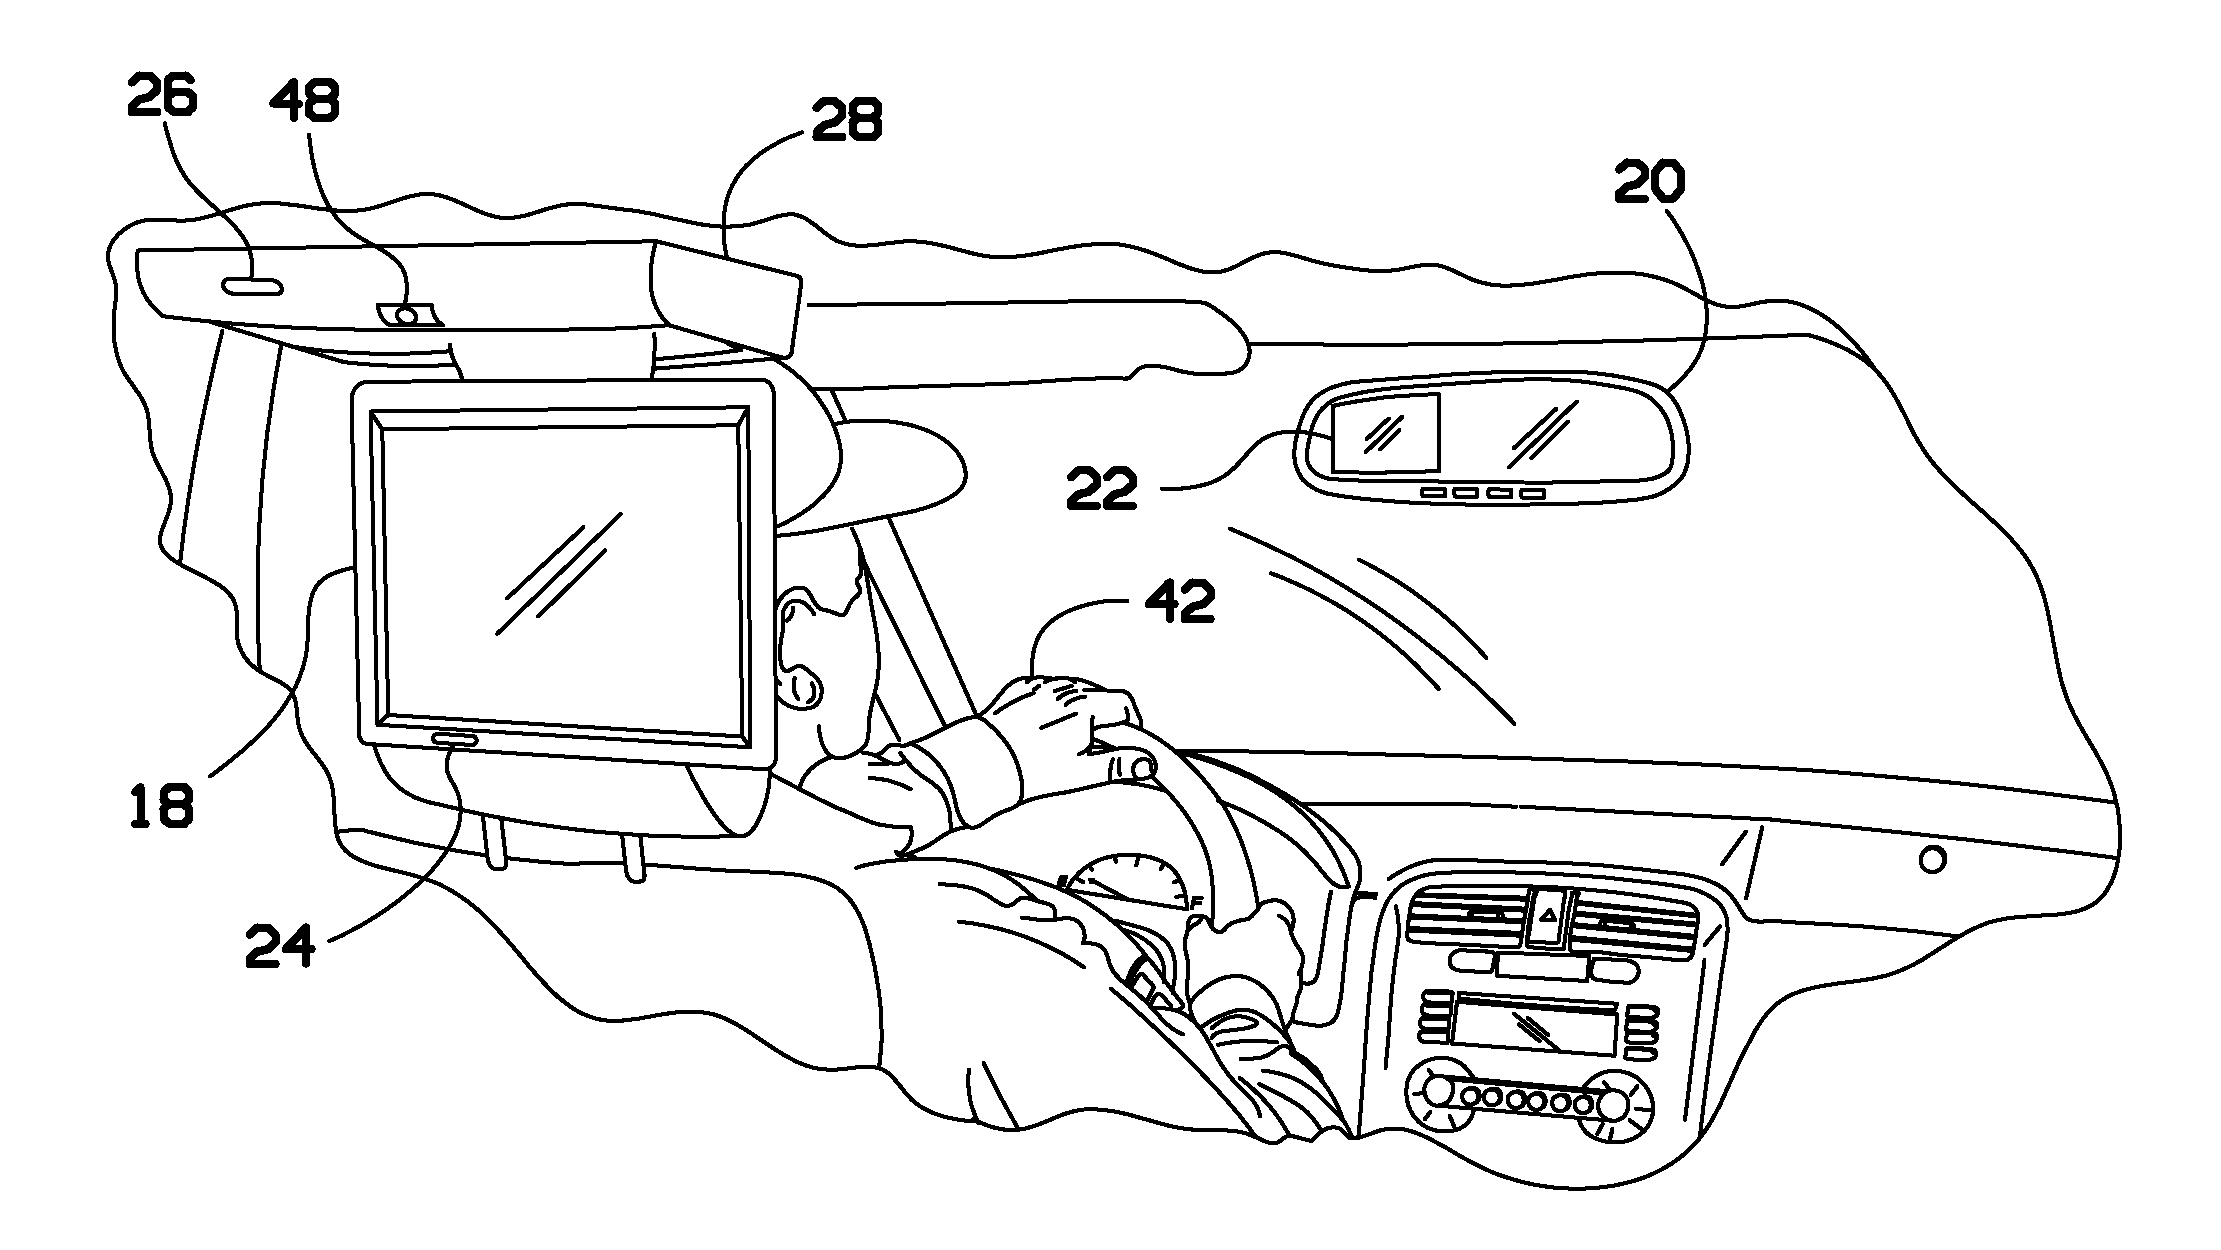 Automatic rear view display in vehicles with entertainment systems